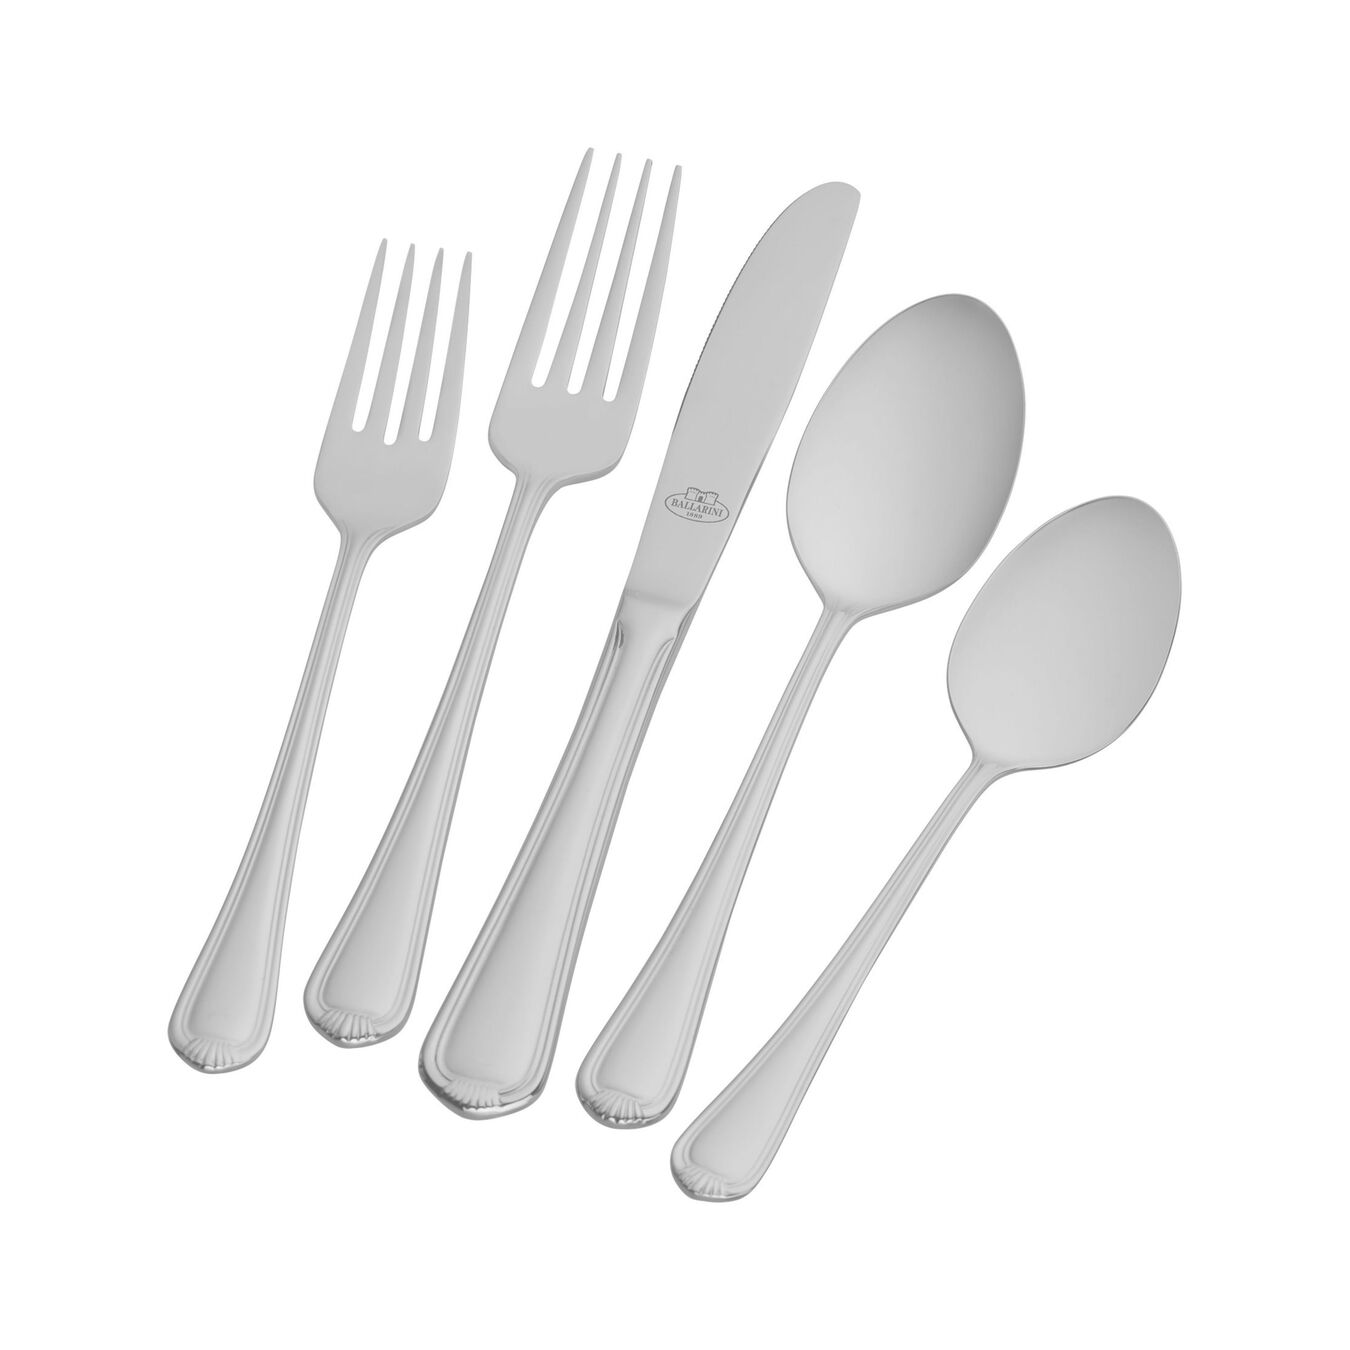 20-pc Flatware Set, 18/10 Stainless Steel ,,large 1